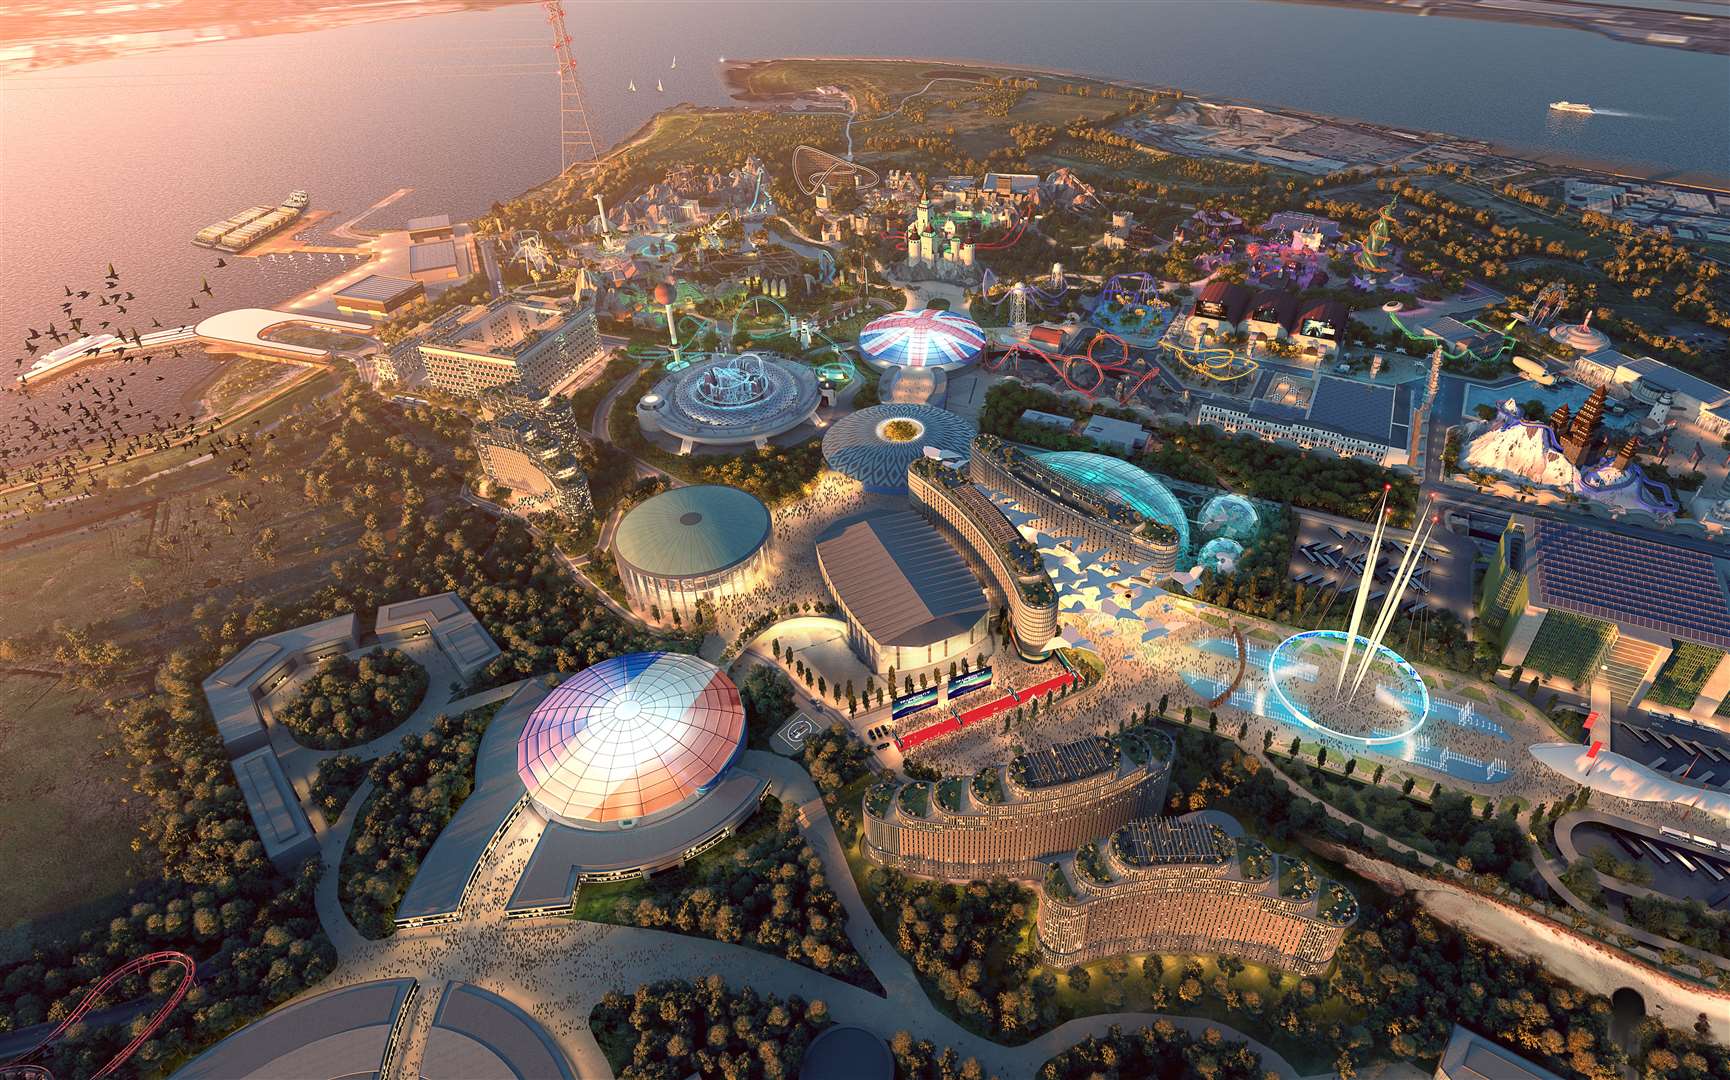 A detailed artist's impression of what the London Resort theme park could look like